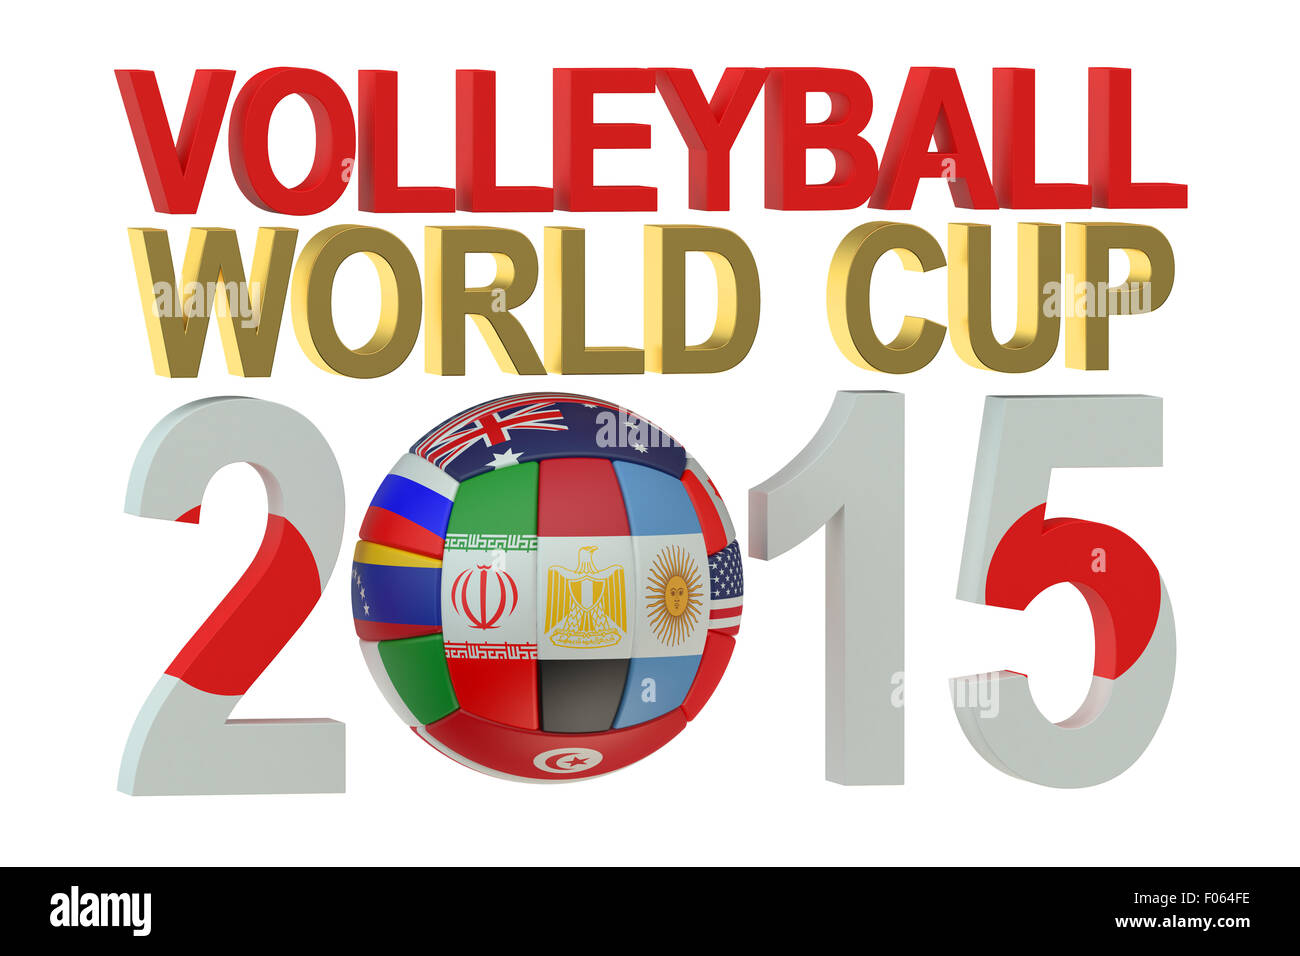 Volleyball World Cup 2015 Japan concept isolated on white background Stock Photo